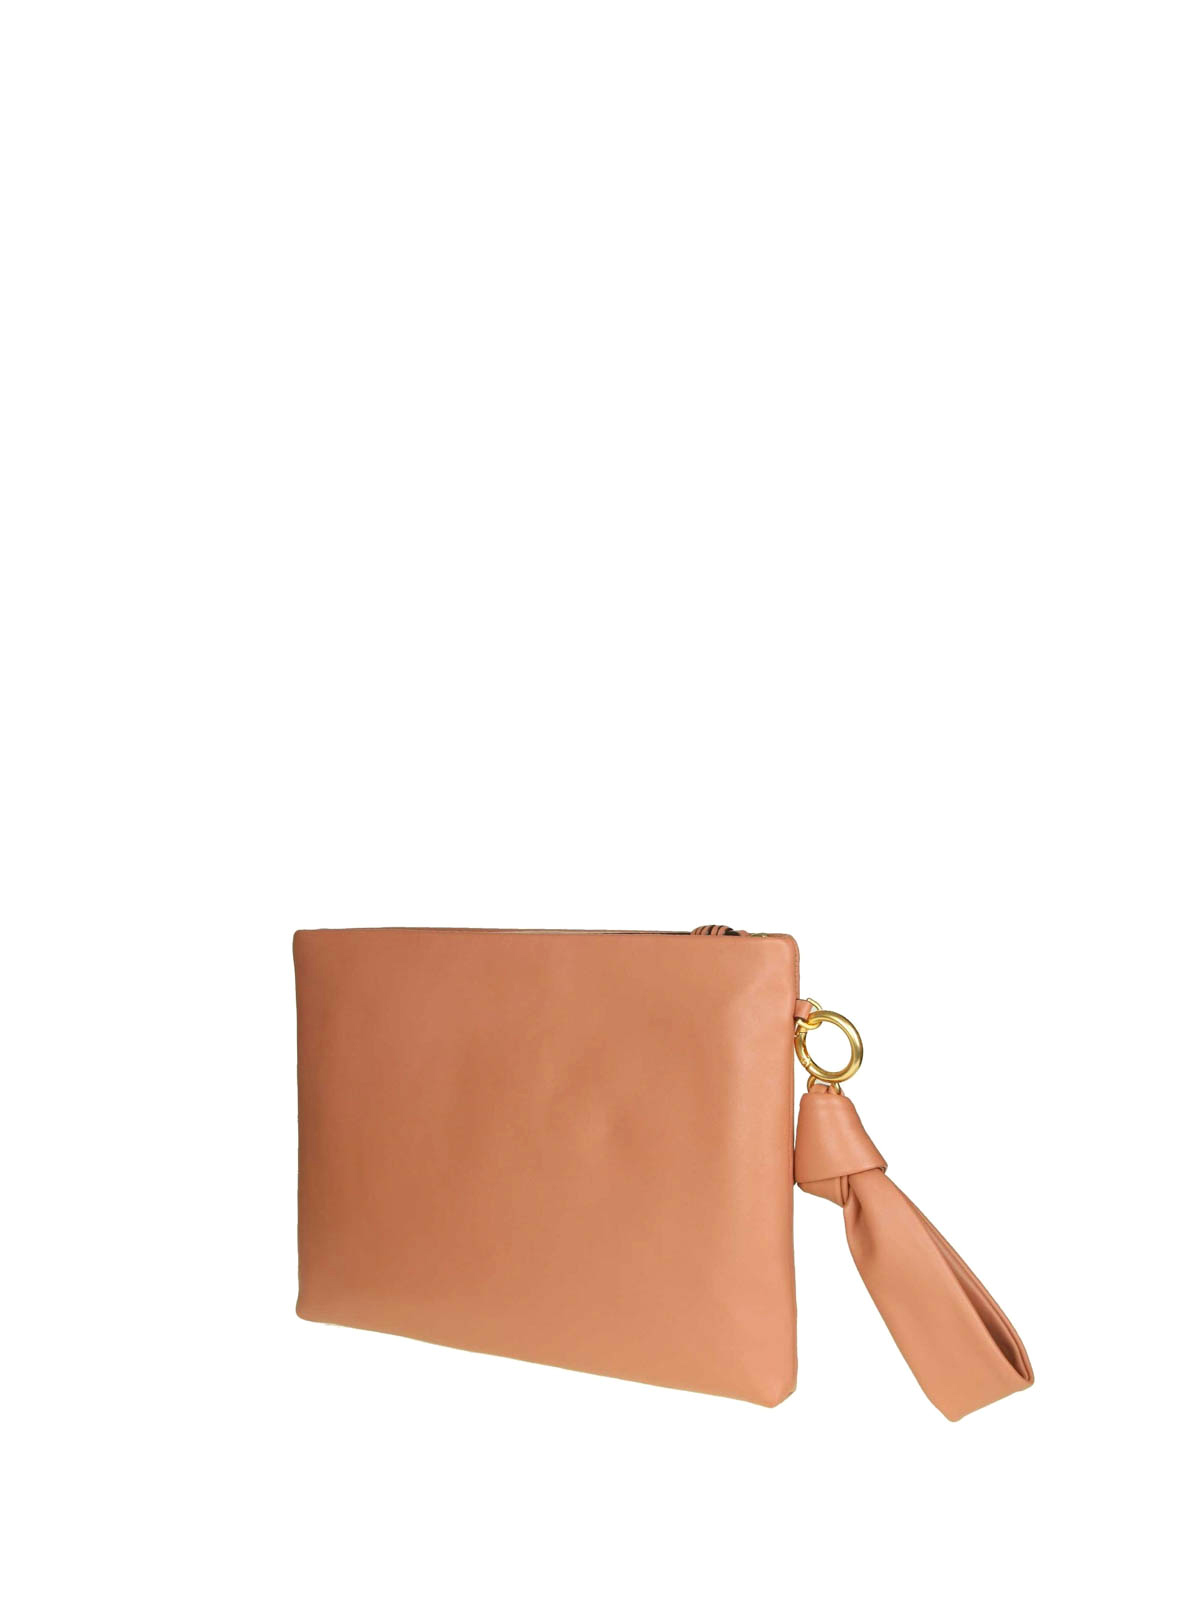 Clutches Tory Burch - Beau light pink leather clutch - 51117235